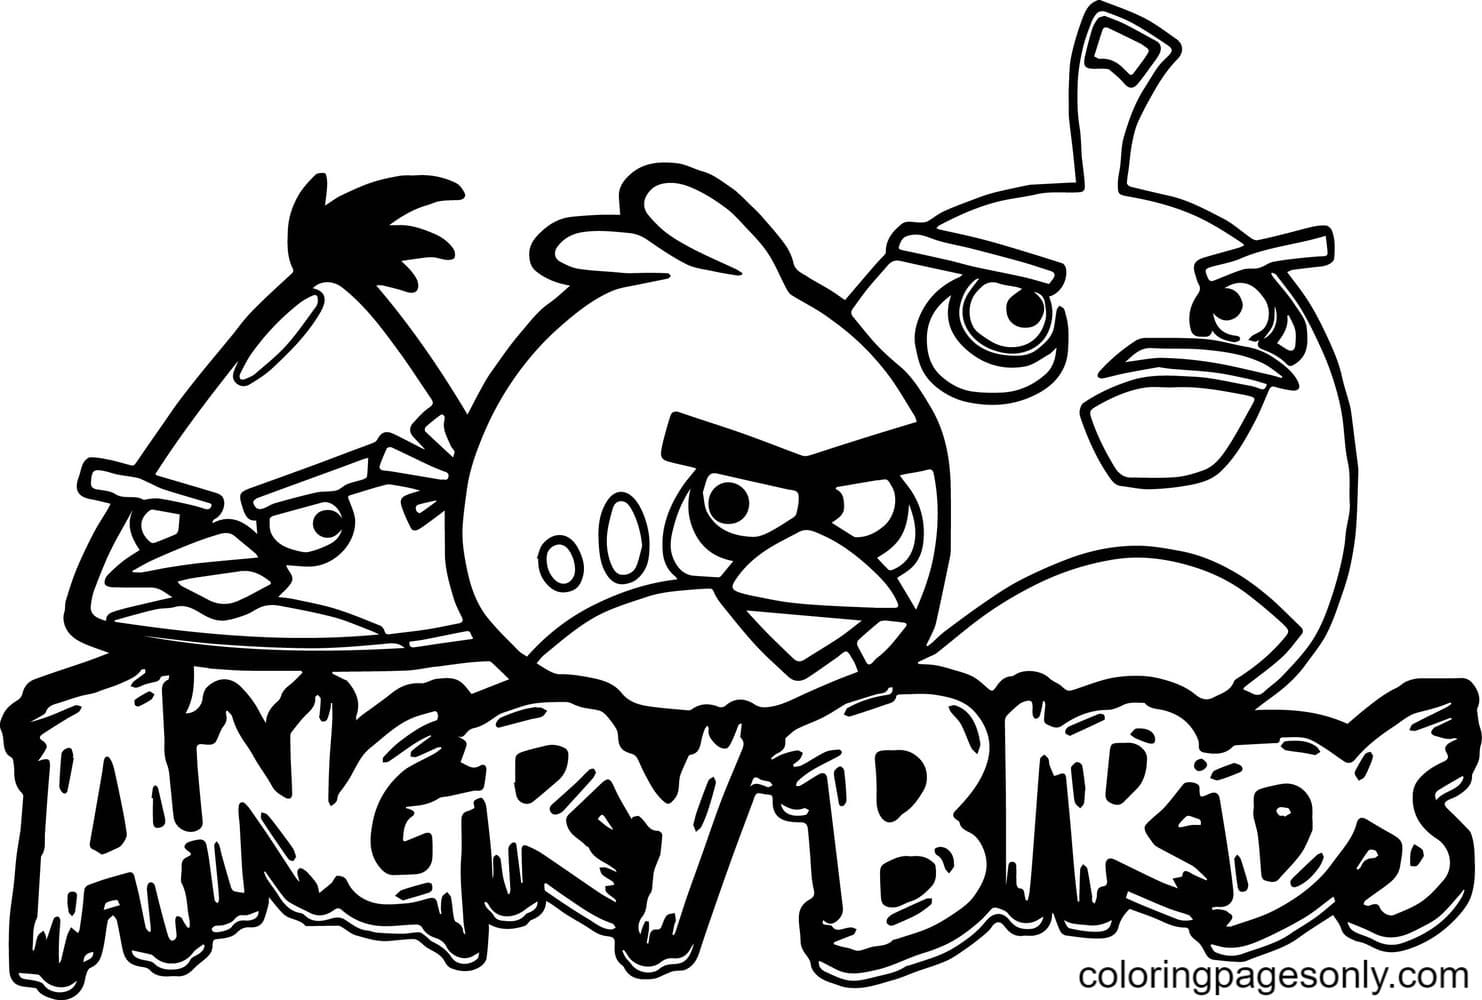 printable-angry-birds-coloring-pages-angry-birds-coloring-pages